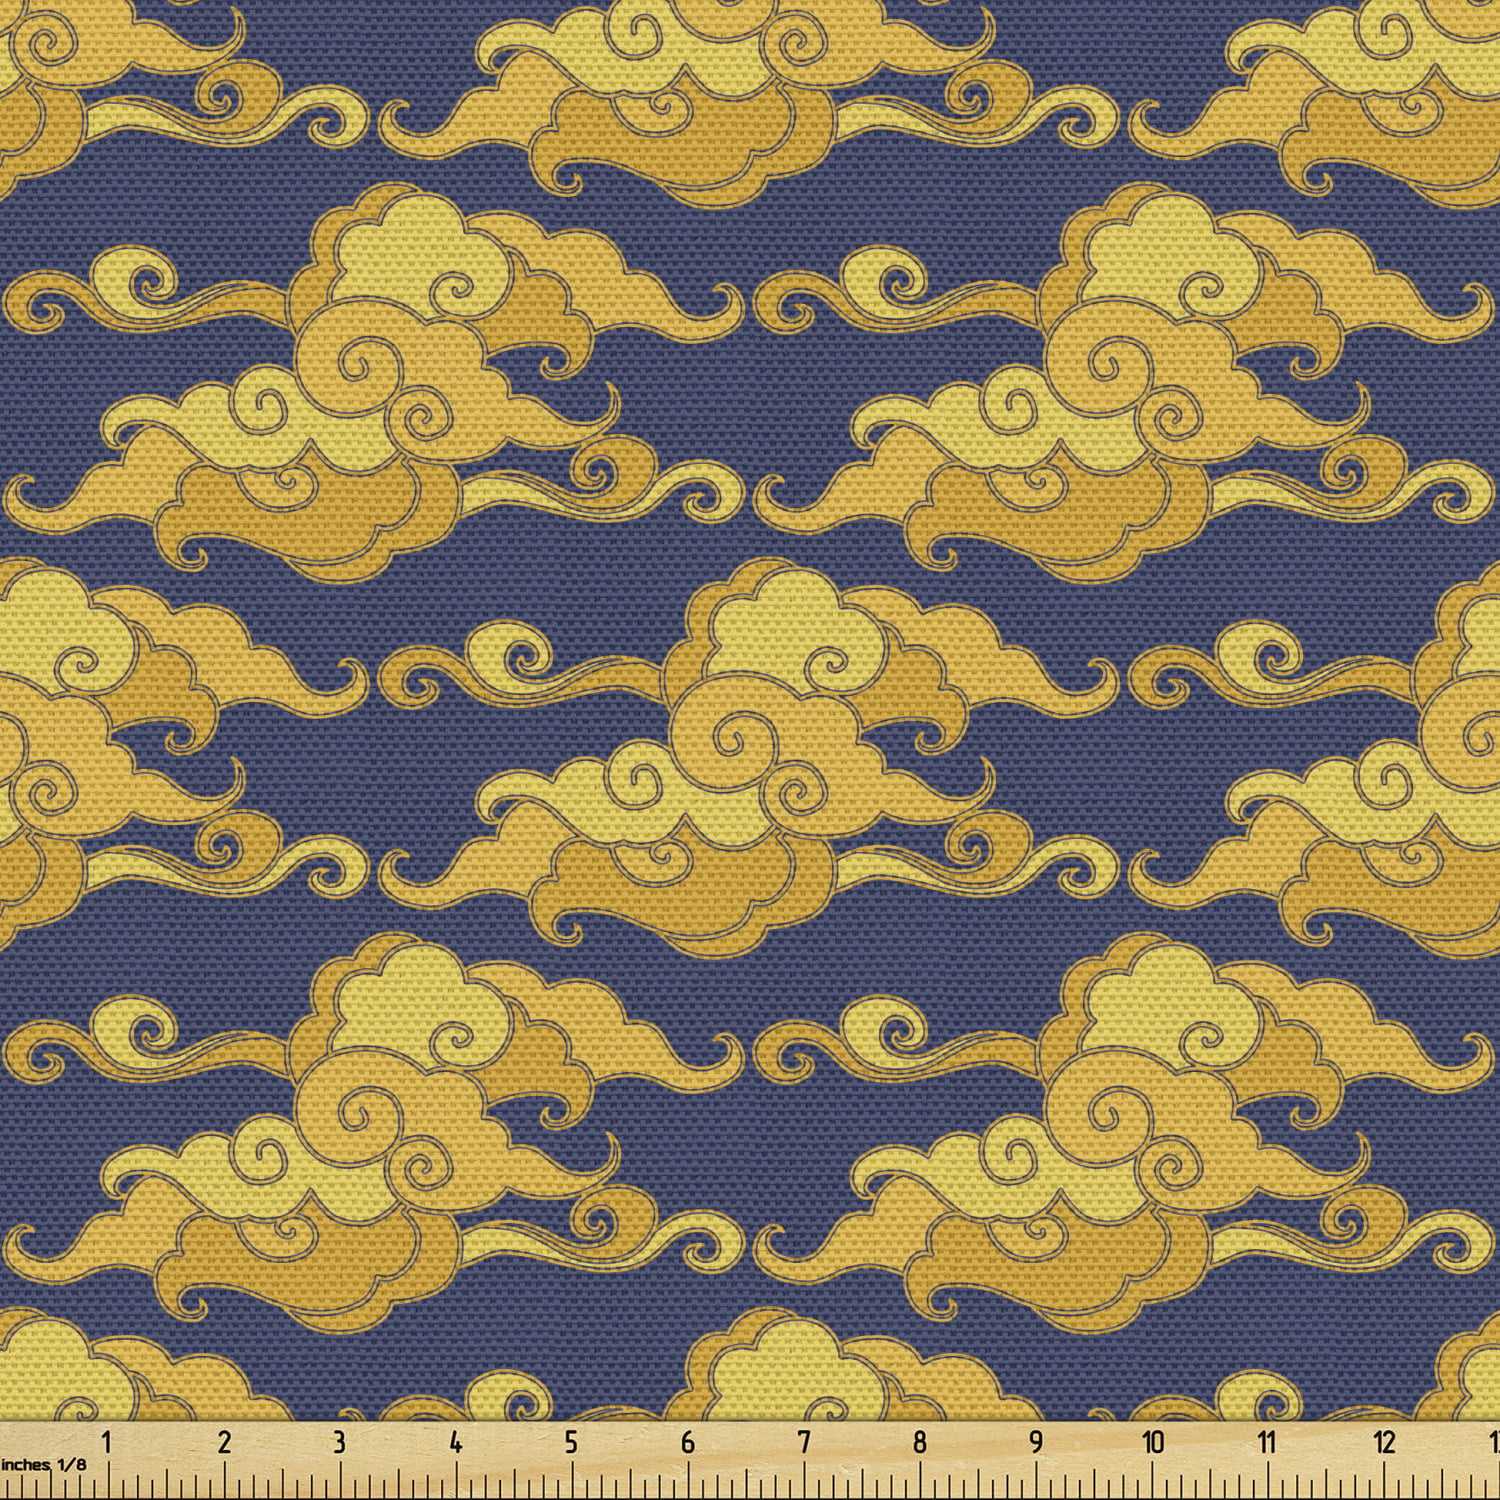 Japanese Fabric by the Yard Upholstery, Golden Yellow Tone Clouds on the with Oriental Drawing, Decorative Fabric for DIY and Home Accents, 5 Yards, Dark Indigo Dark Yellow Ambesonne -